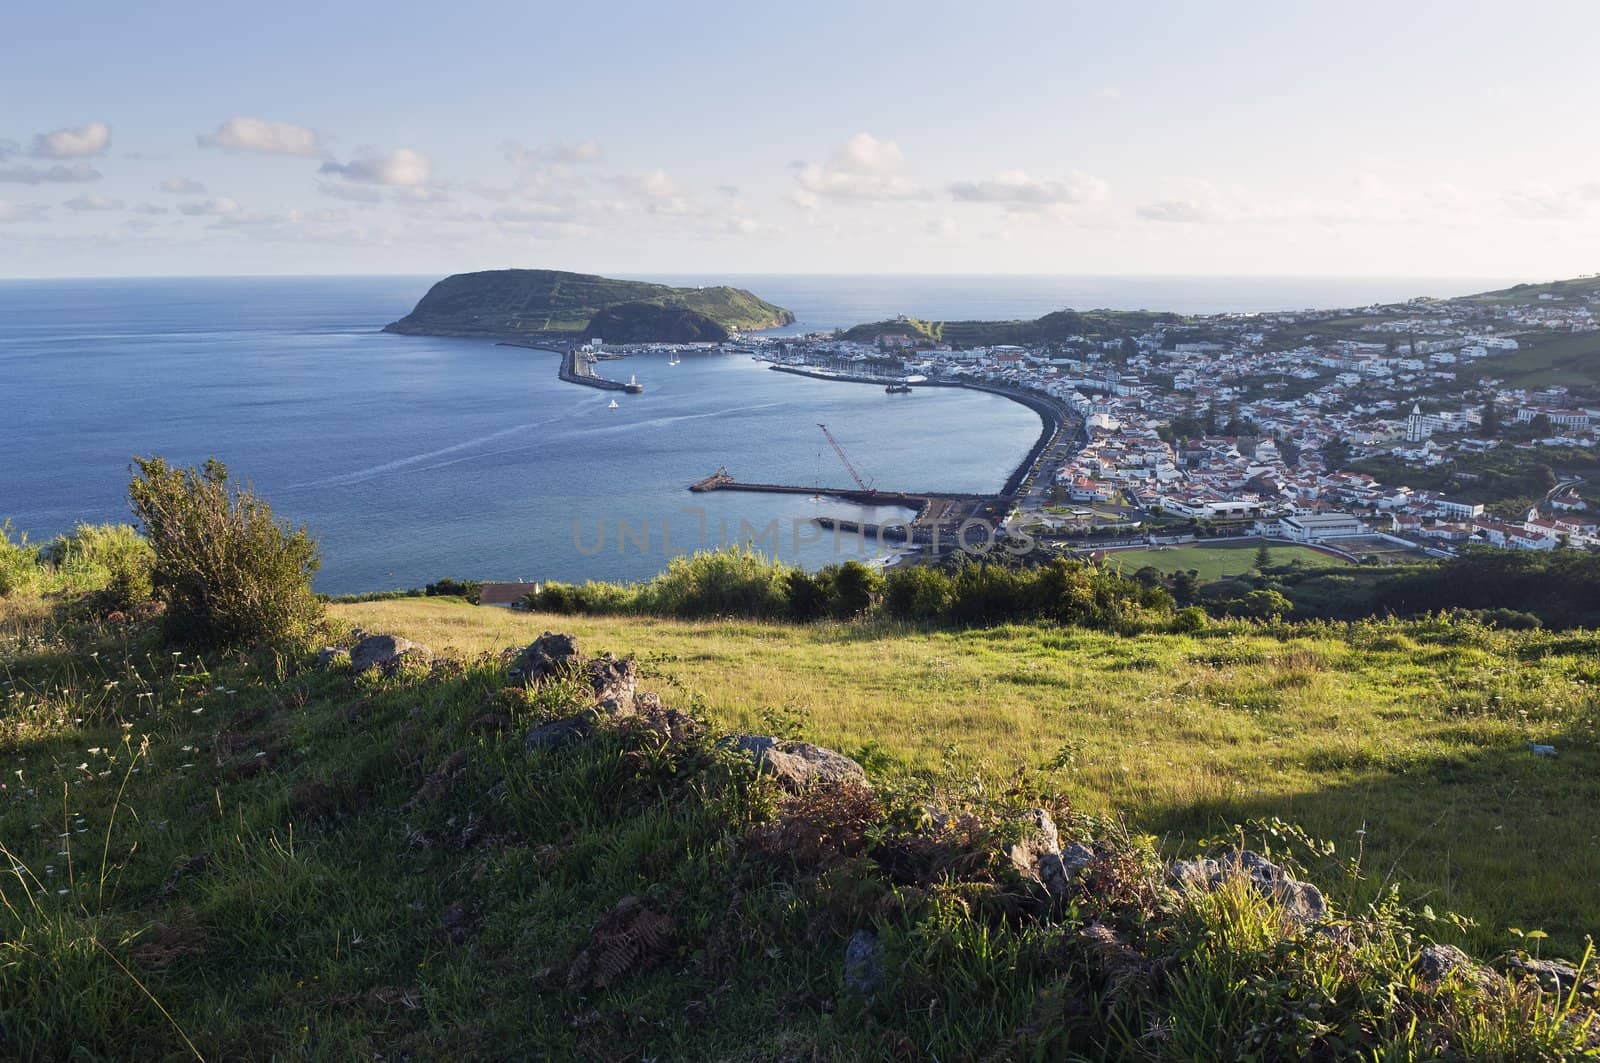 View over the city of Horta in Faial island, Azores, Portugal